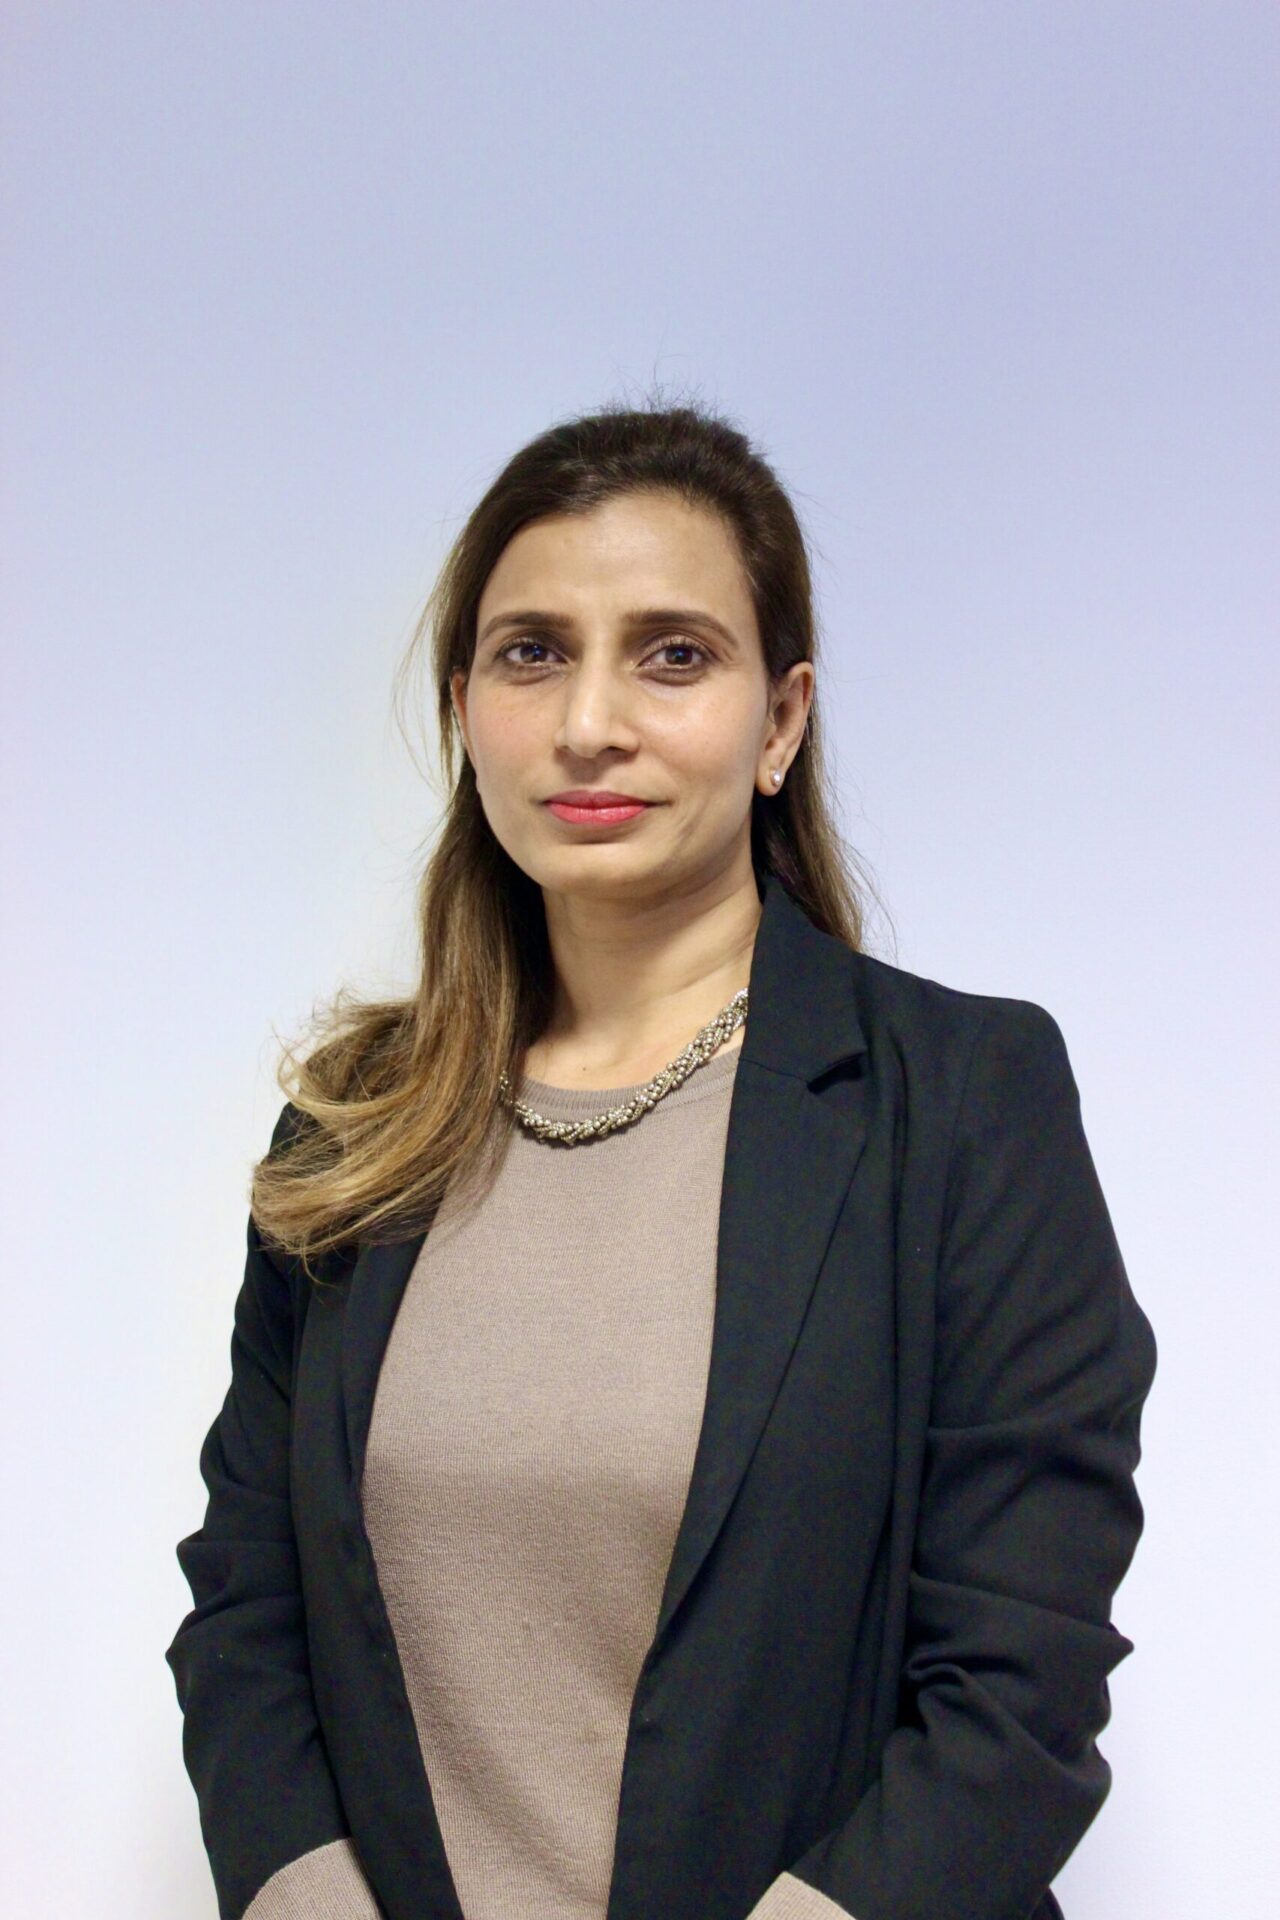 Ishrat Khan, Head of Compliance at Exchange Legal Services, depicted in a professional context, showcasing her expertise in banking and regulatory compliance.